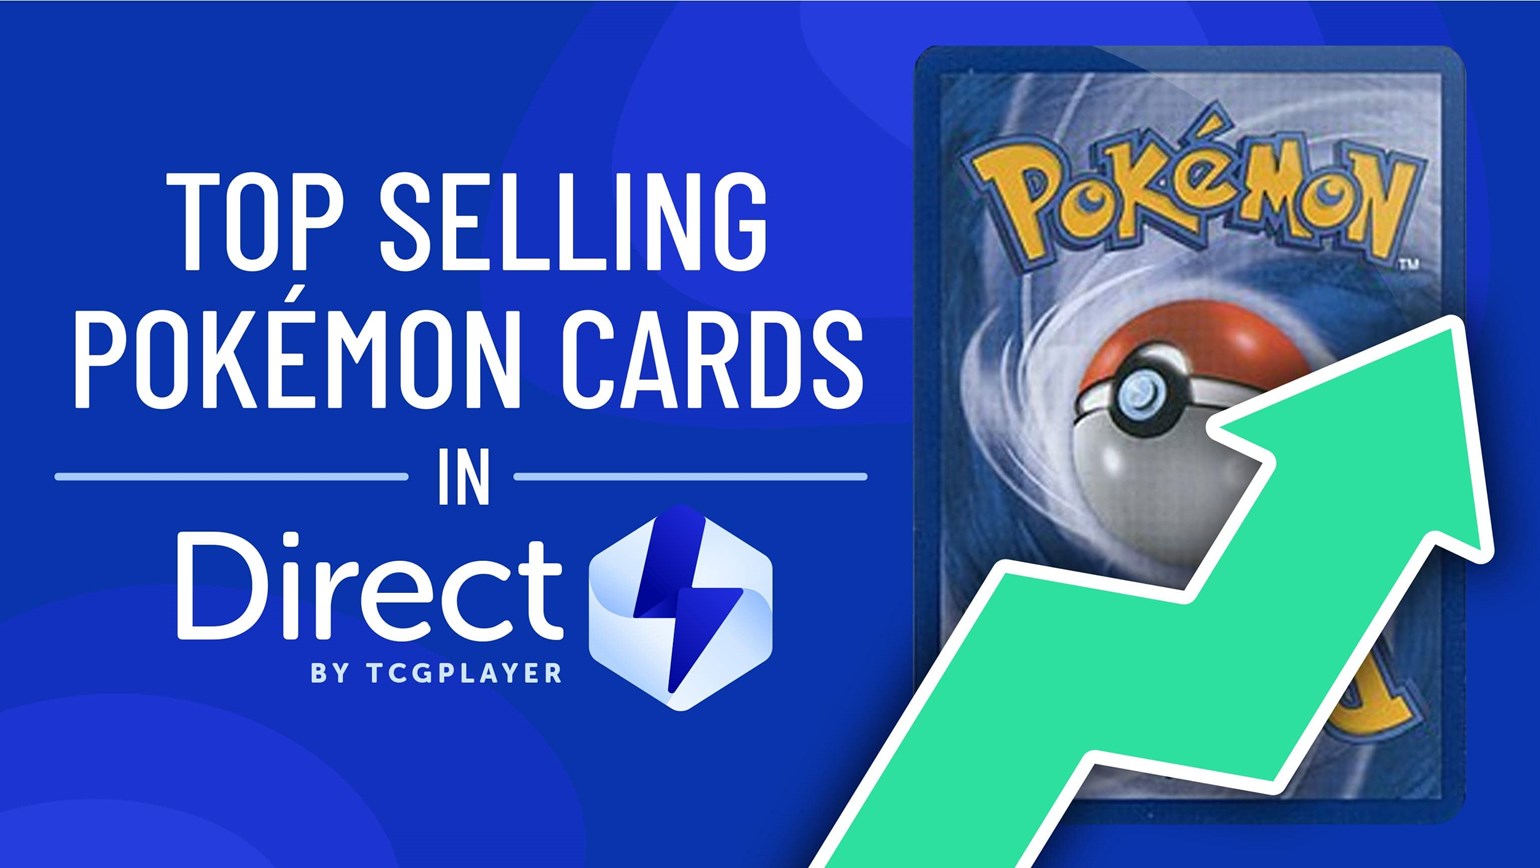 January Top Selling Pokémon Cards in Direct by TCGplayer